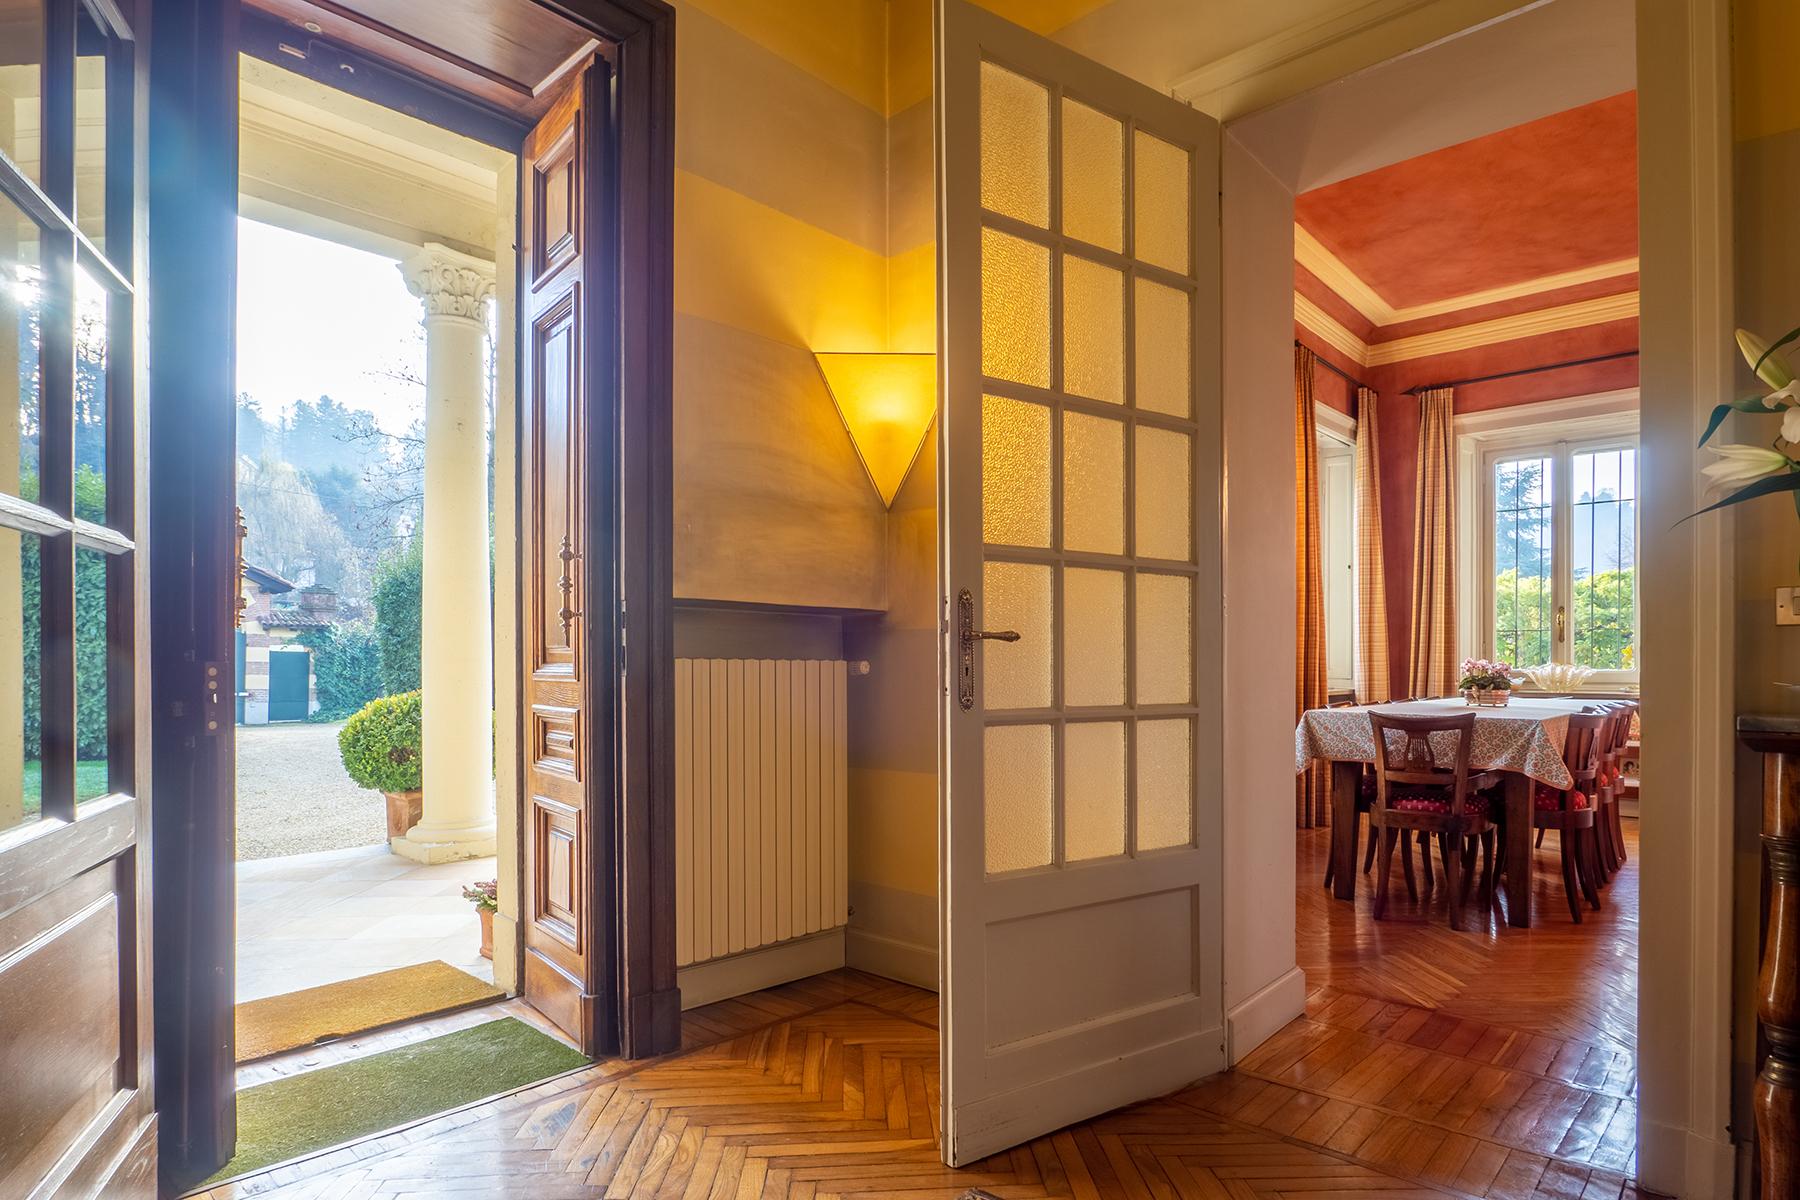 Exquisite villa with swimming pool in the hill of Turin - 9